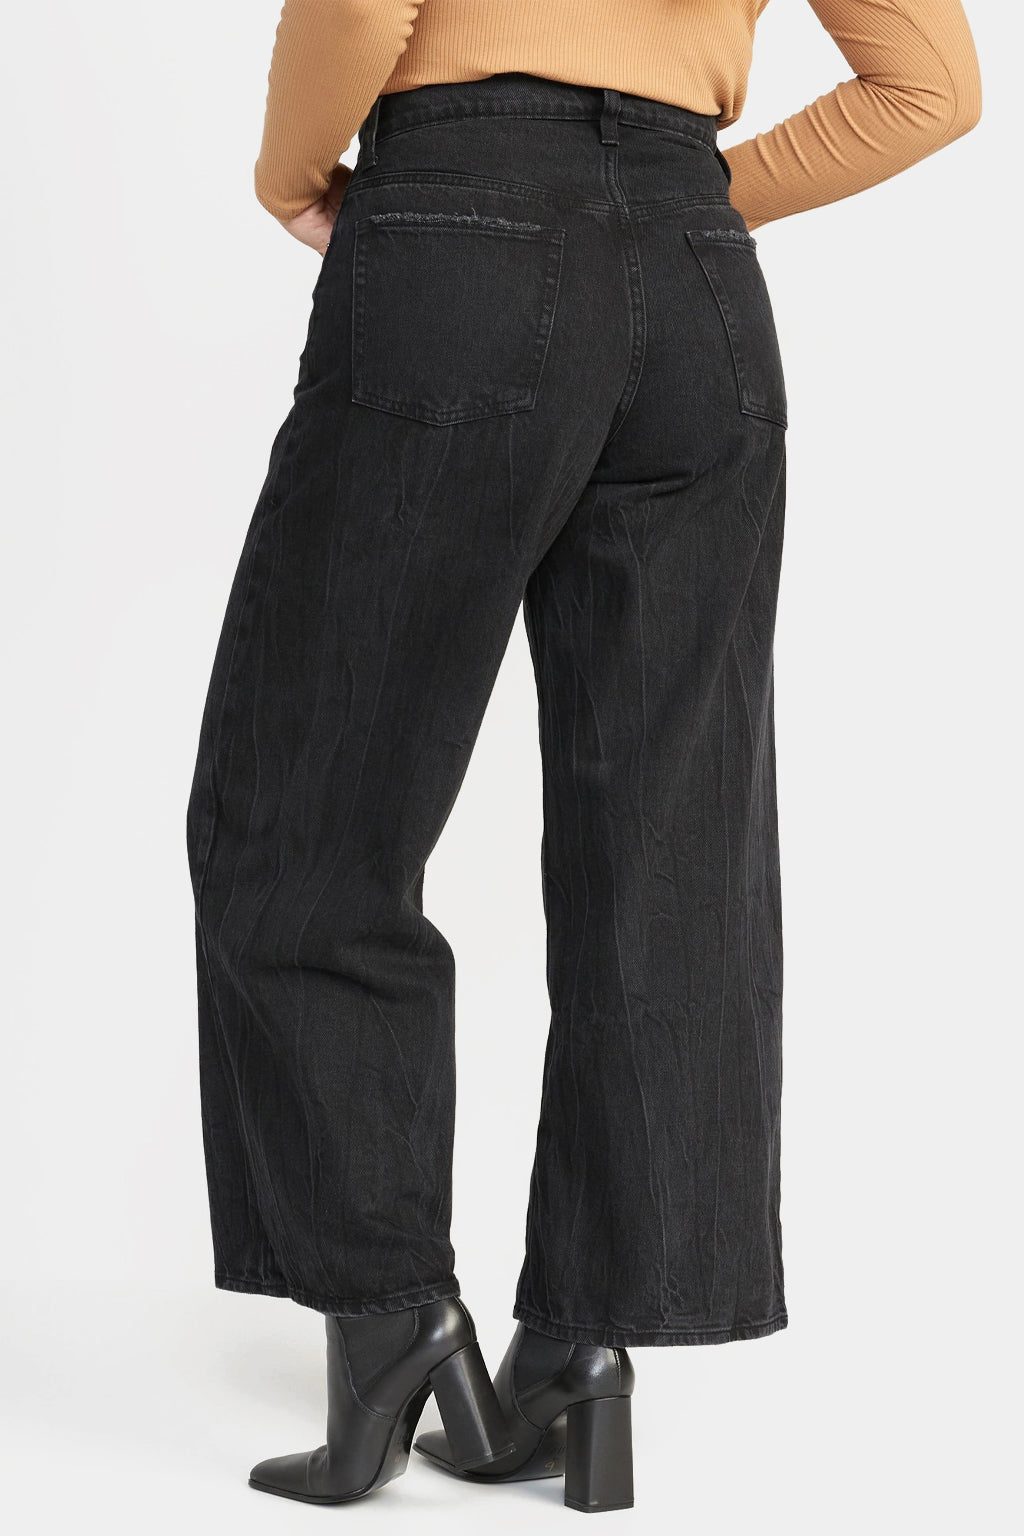 Old Navy - Extra High-Waisted Baggy Wide-Leg Non-Stretch Jeans for Women